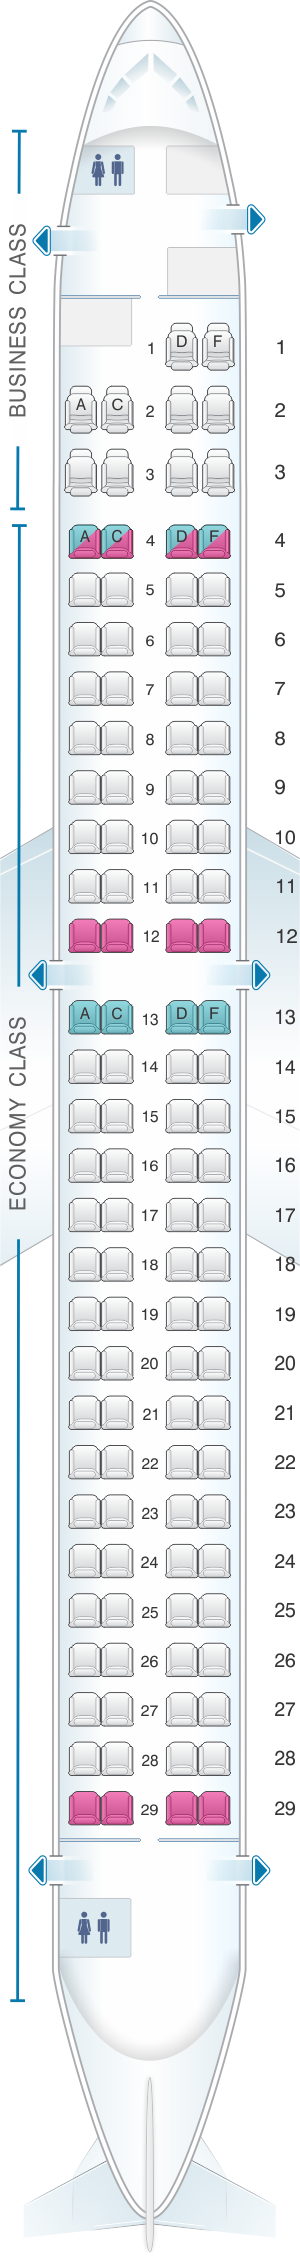 Seat map for Saravia Embraer 190